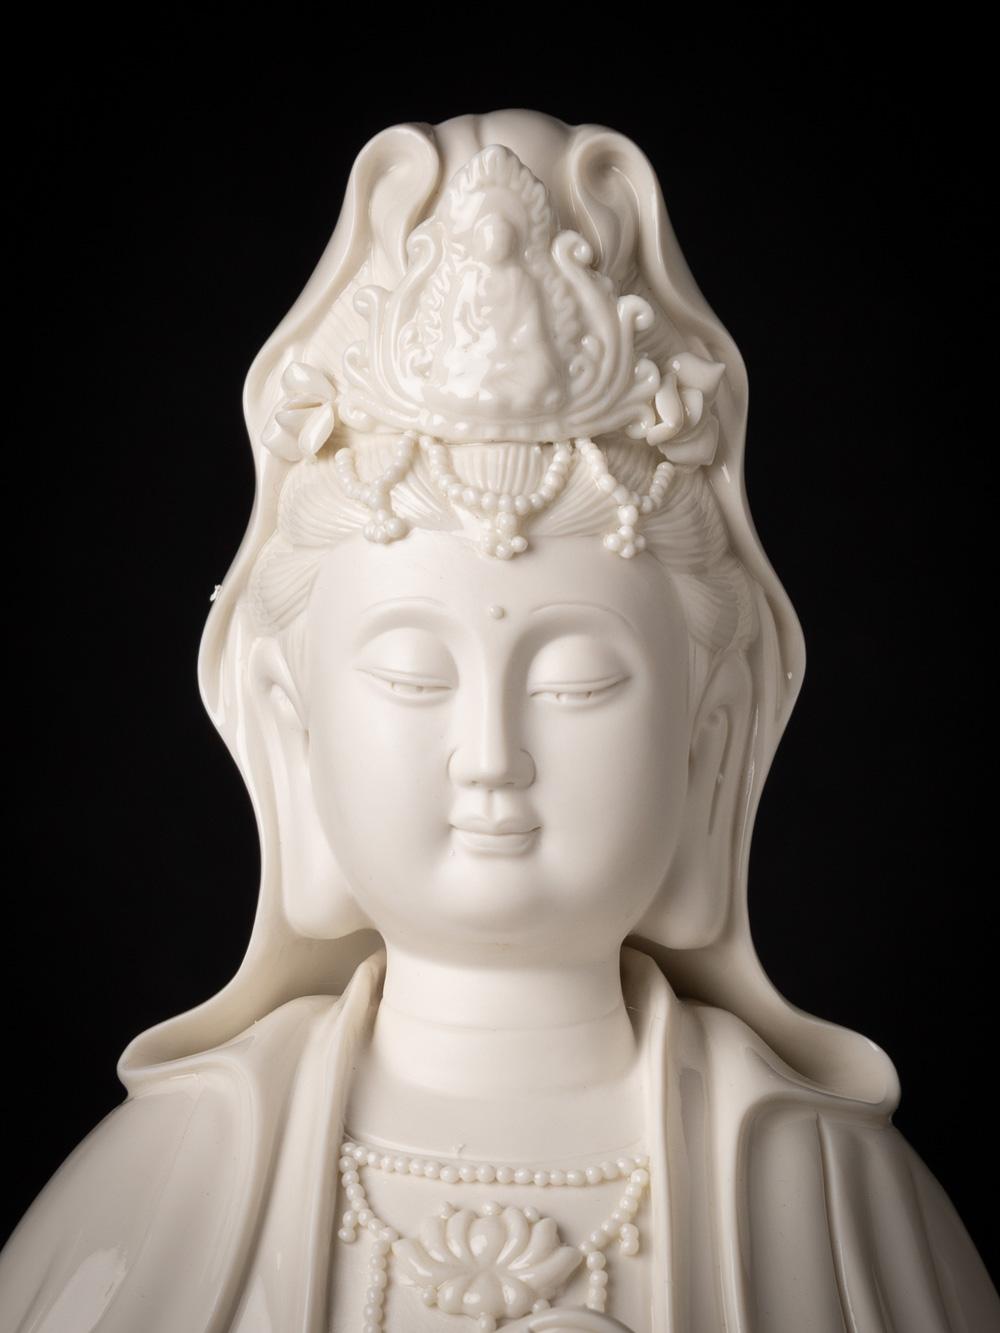 Beautiful and detailed porcelain Guan Yin statue originated from China 5